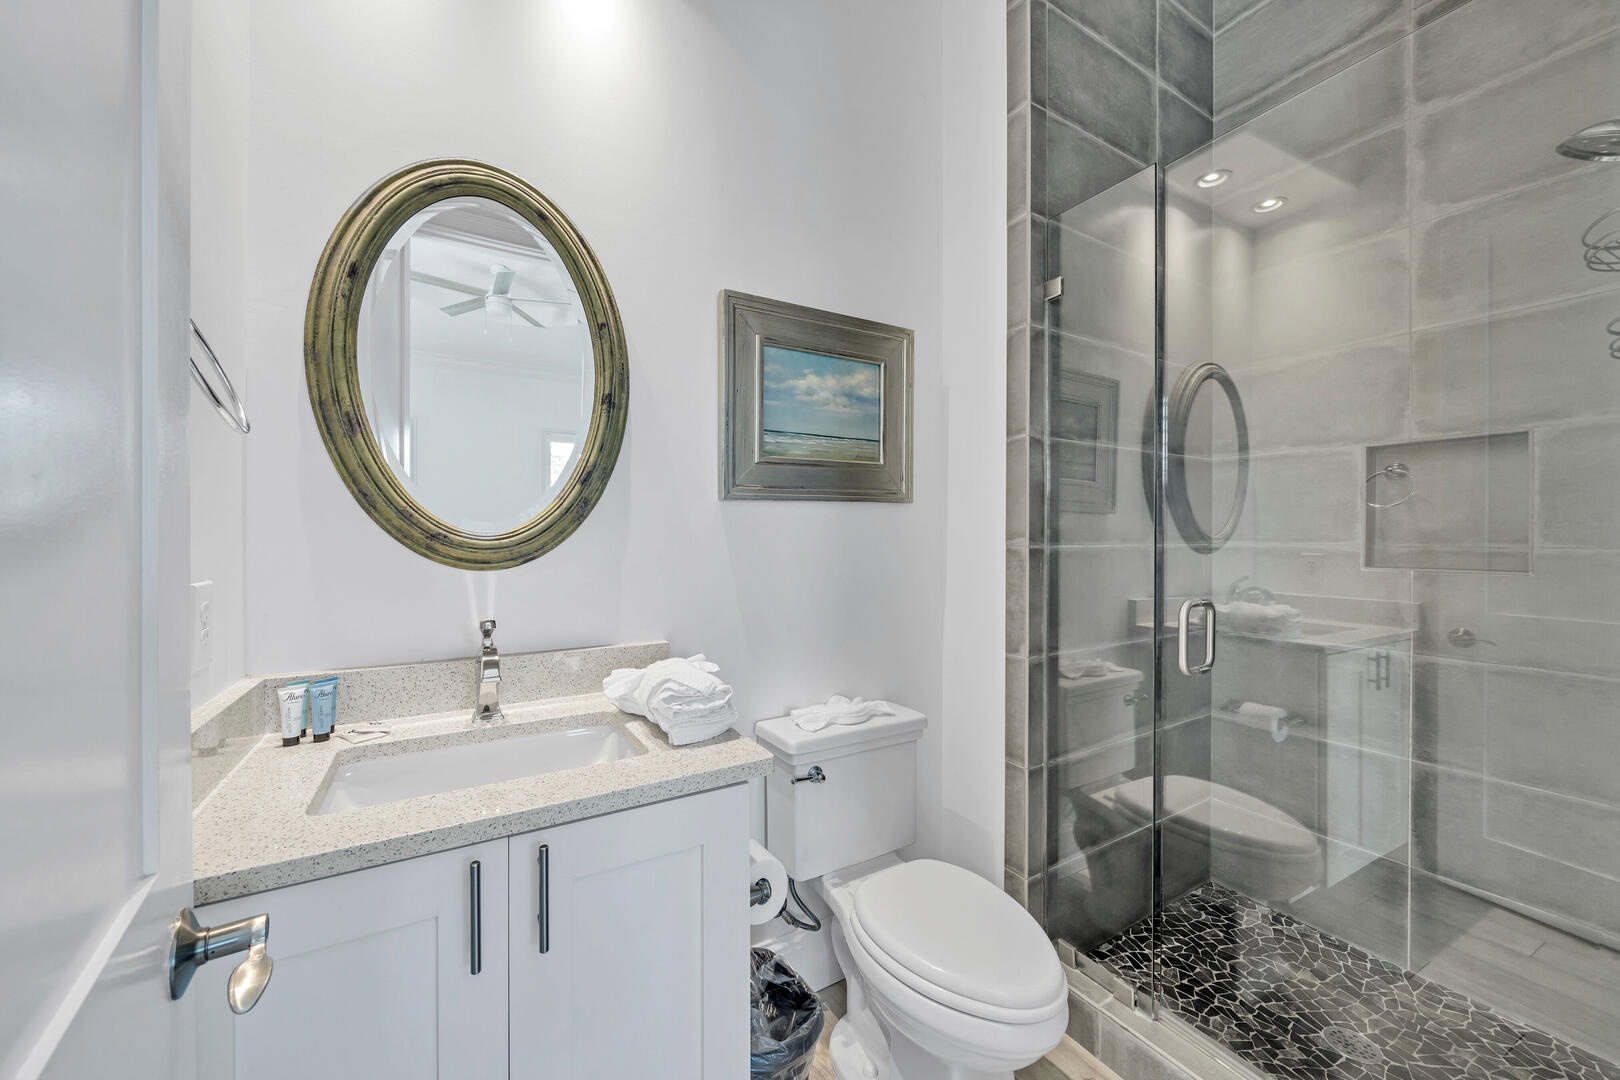 The 2nd floor king suite includes a private bathroom with walk-in shower!